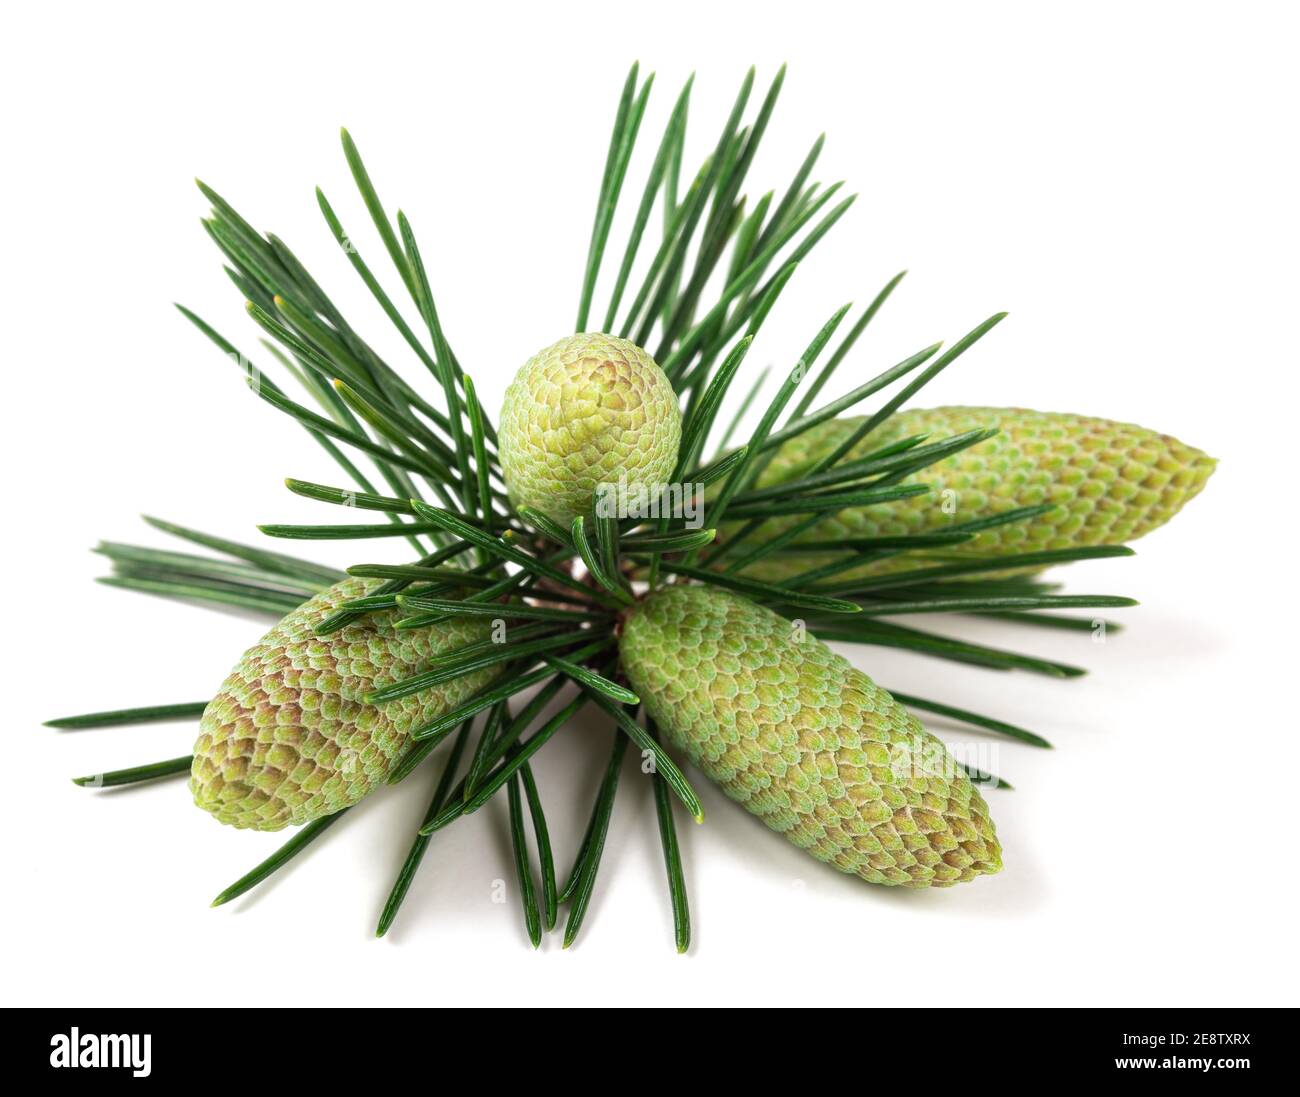 Cedrus deodara branch with cones isolated on white background Stock Photo